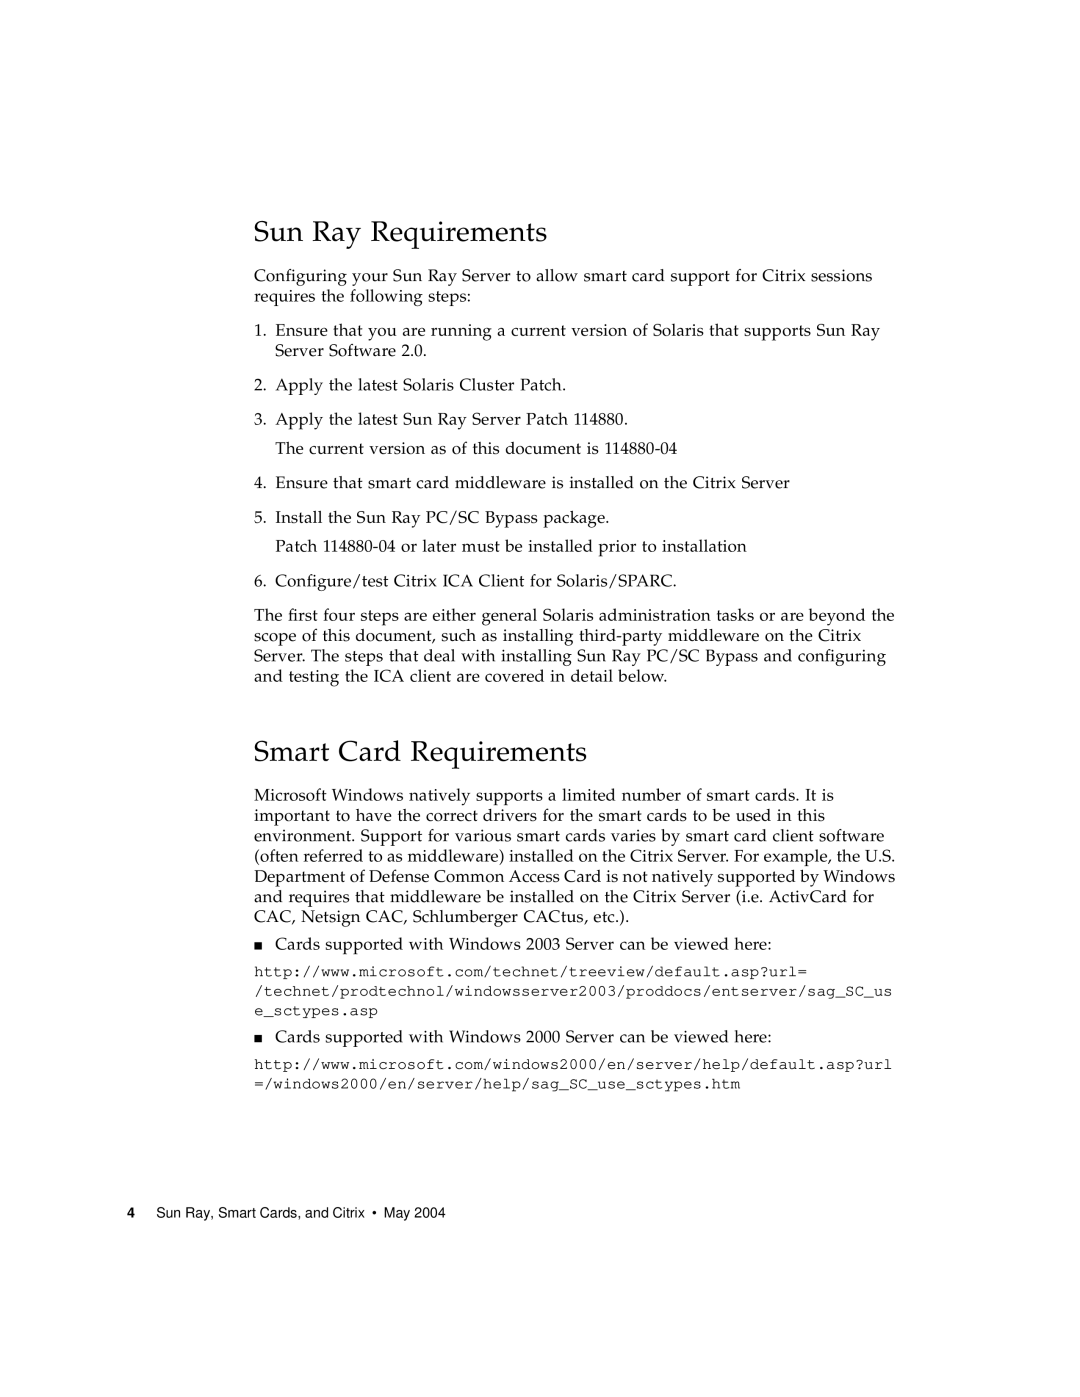 Sun Microsystems and Citrix, Smart Cards manual Sun Ray Requirements, Smart Card Requirements 